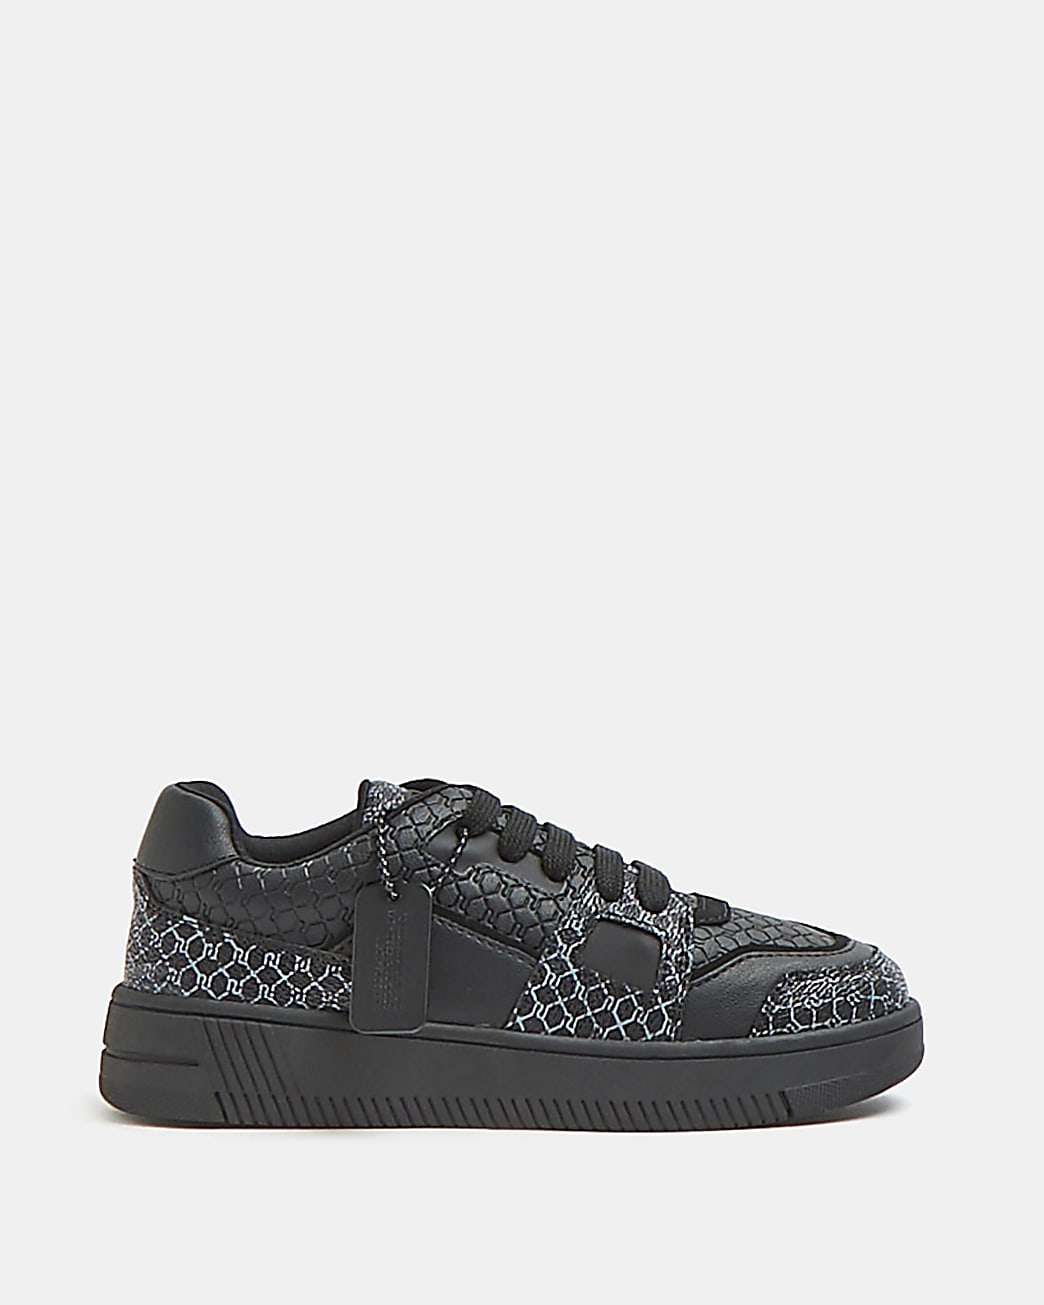 Boys black RI lace up trainers